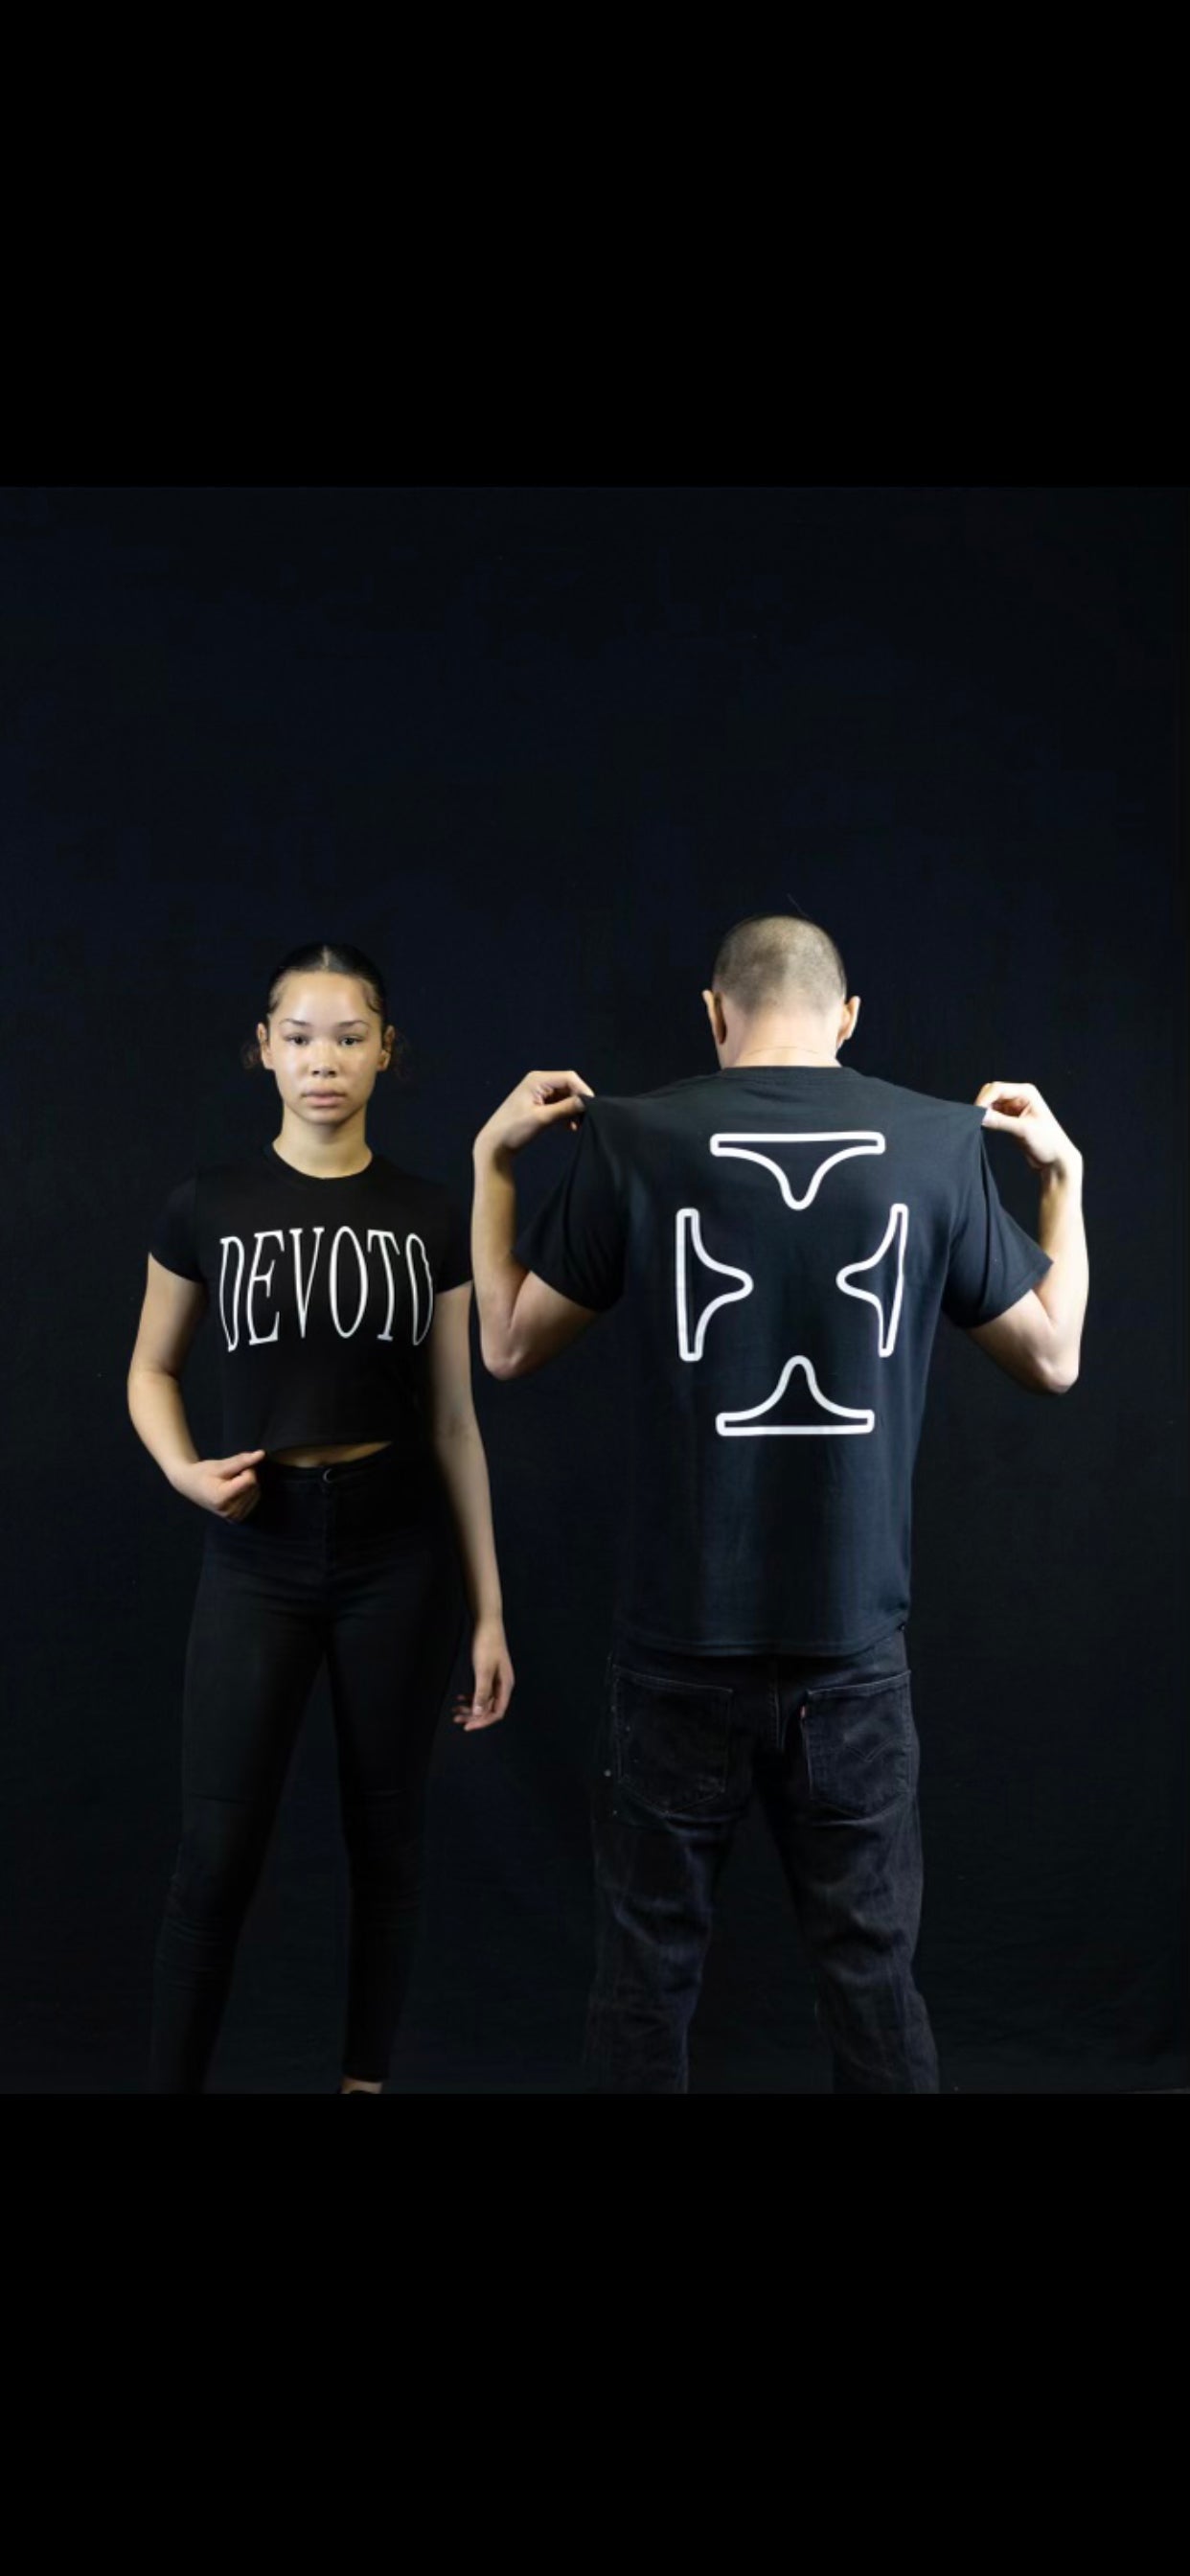 Devoto Banner with black pink graphic tee